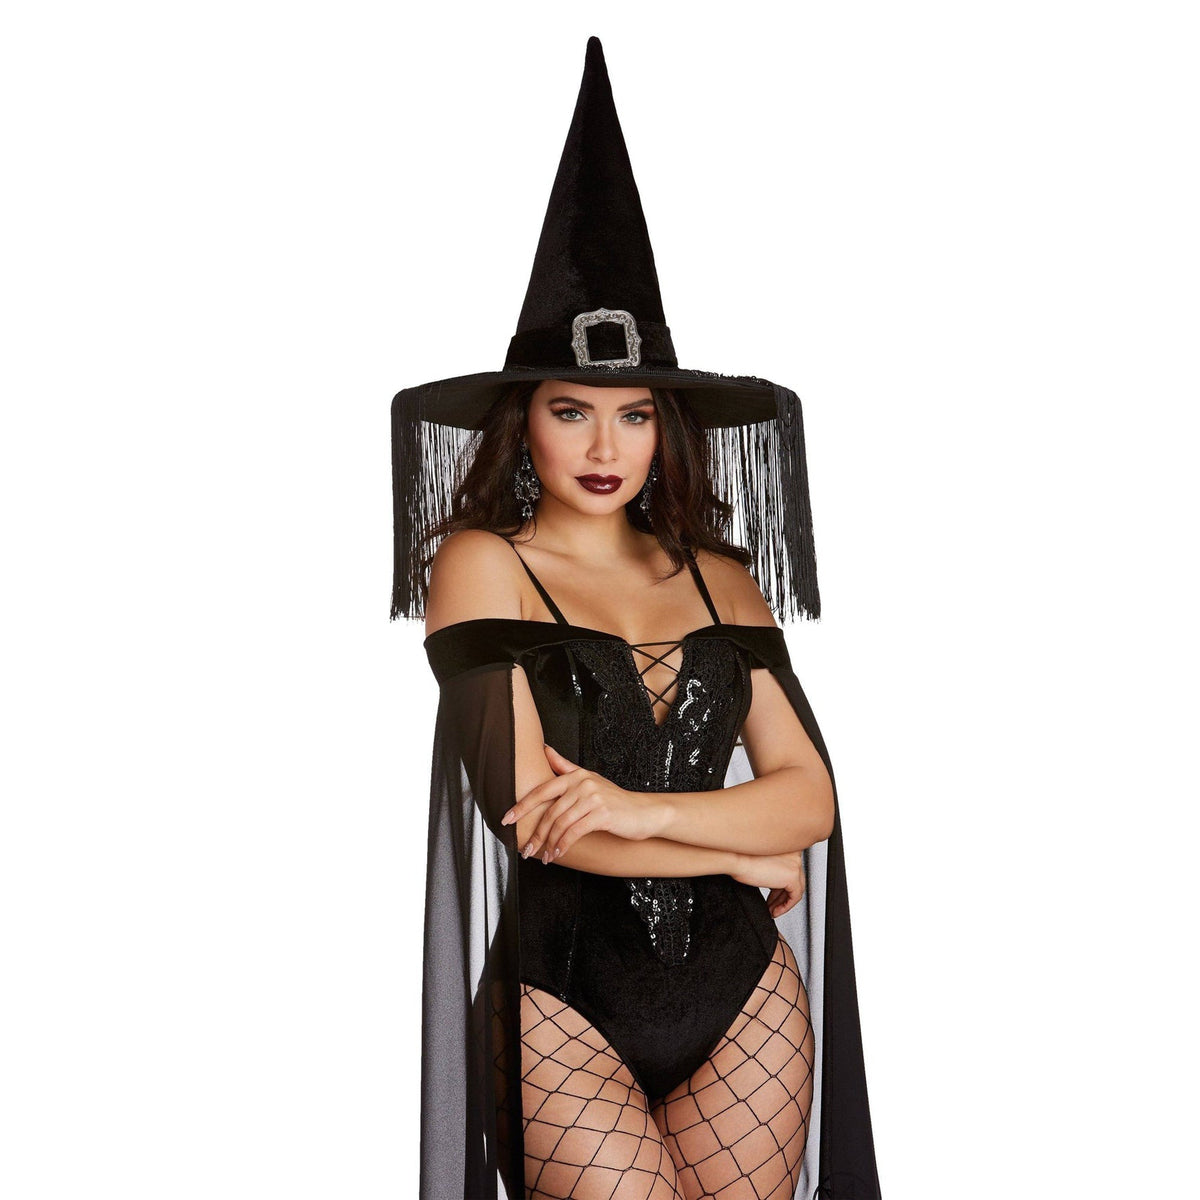 IMPORTATIONS JOLARSPECK INC Costume Accessories Wicked Witch Hat With Fringes